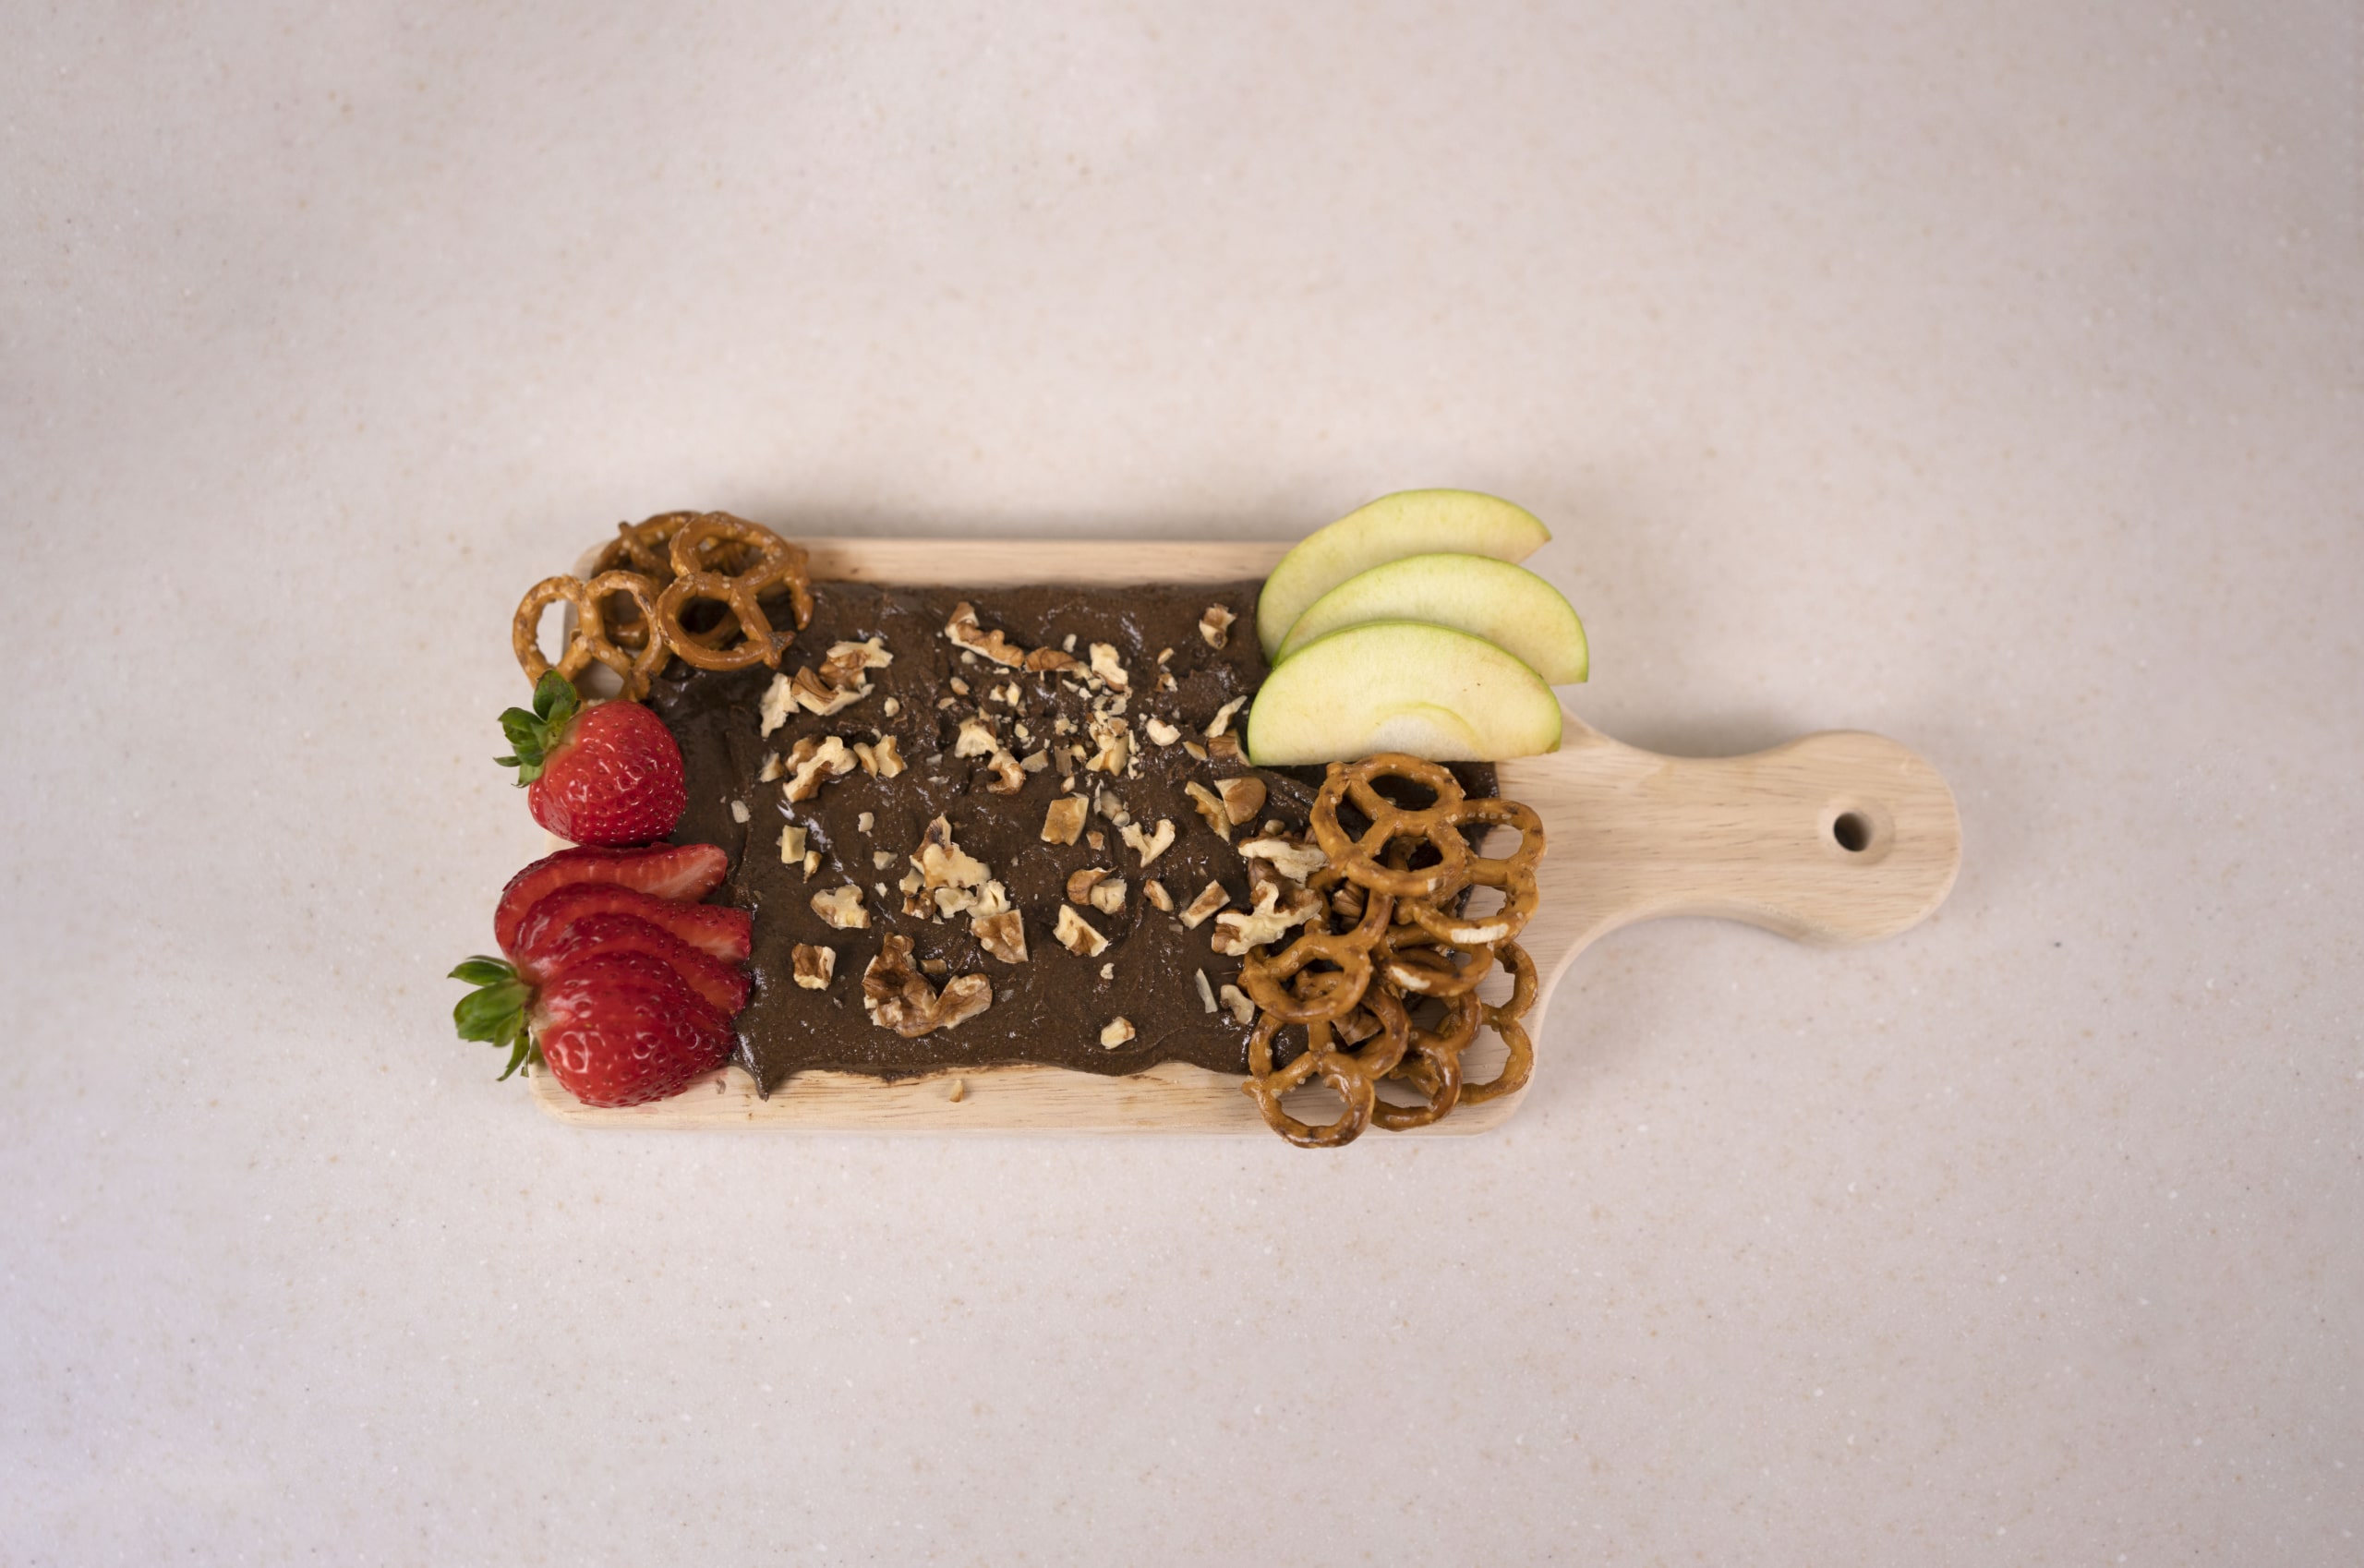 A butter board made with cocoa almond butter, organic walnuts, strawberries, and green apples.